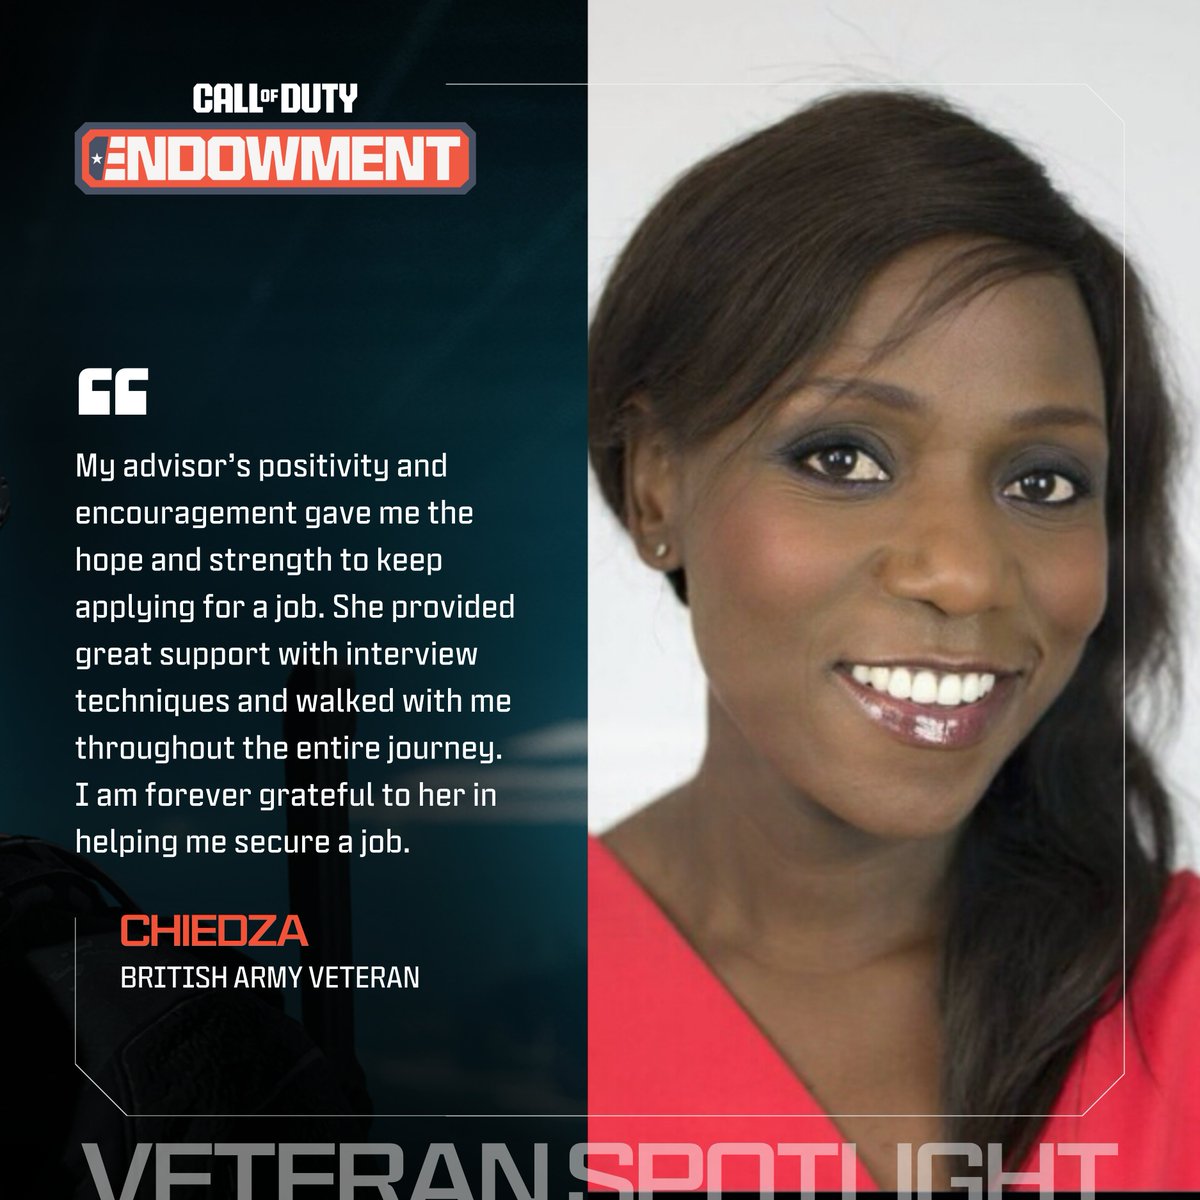 Since launching in the U.K. in 2018, the Endowment has successfully placed almost 4,000 veterans like Chiedza into jobs alongside our grantee partners, @ForcesEmploy and @supportthewalk. Last year, we celebrated our impact at the British Army vs. Royal Navy Rugby Match. Stay